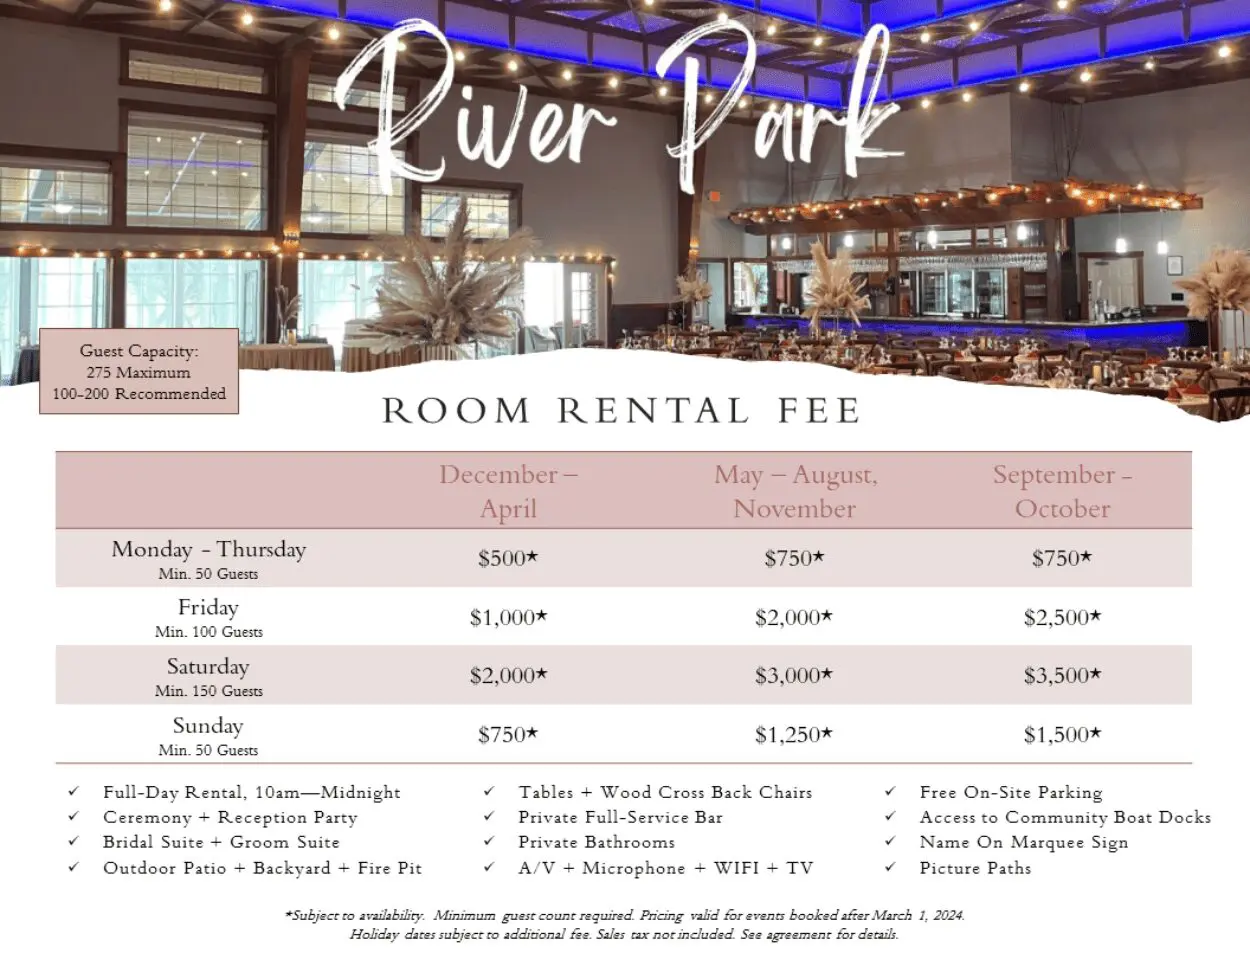 A room rental fee for river park